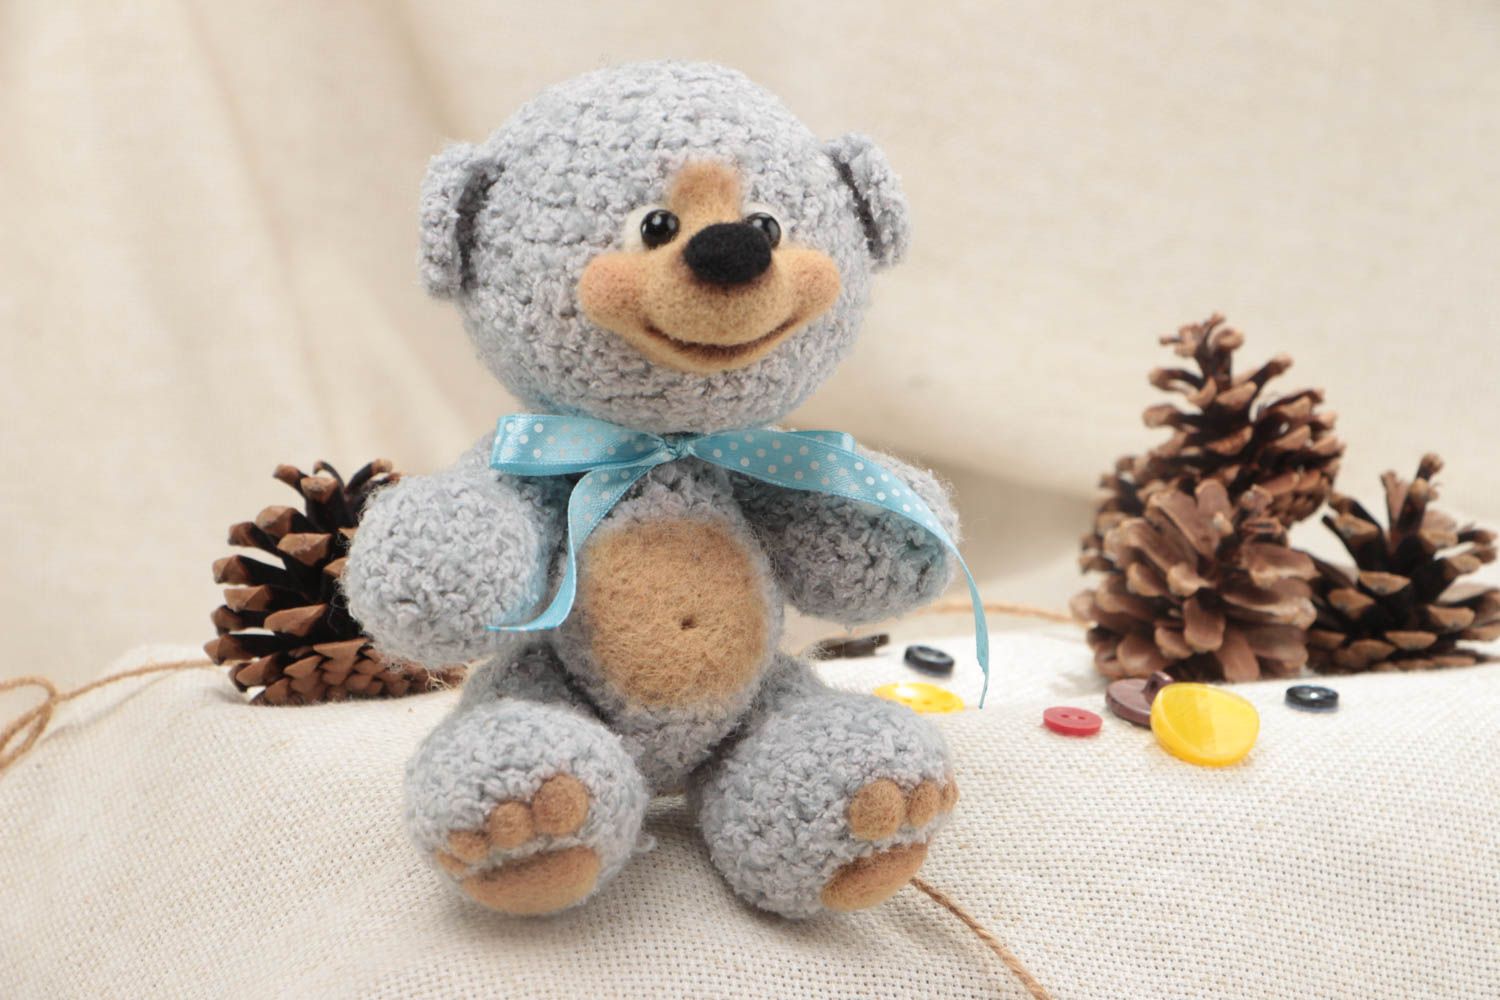 Blue crocheted bear toy made of textured and wool yarns handmade present photo 1